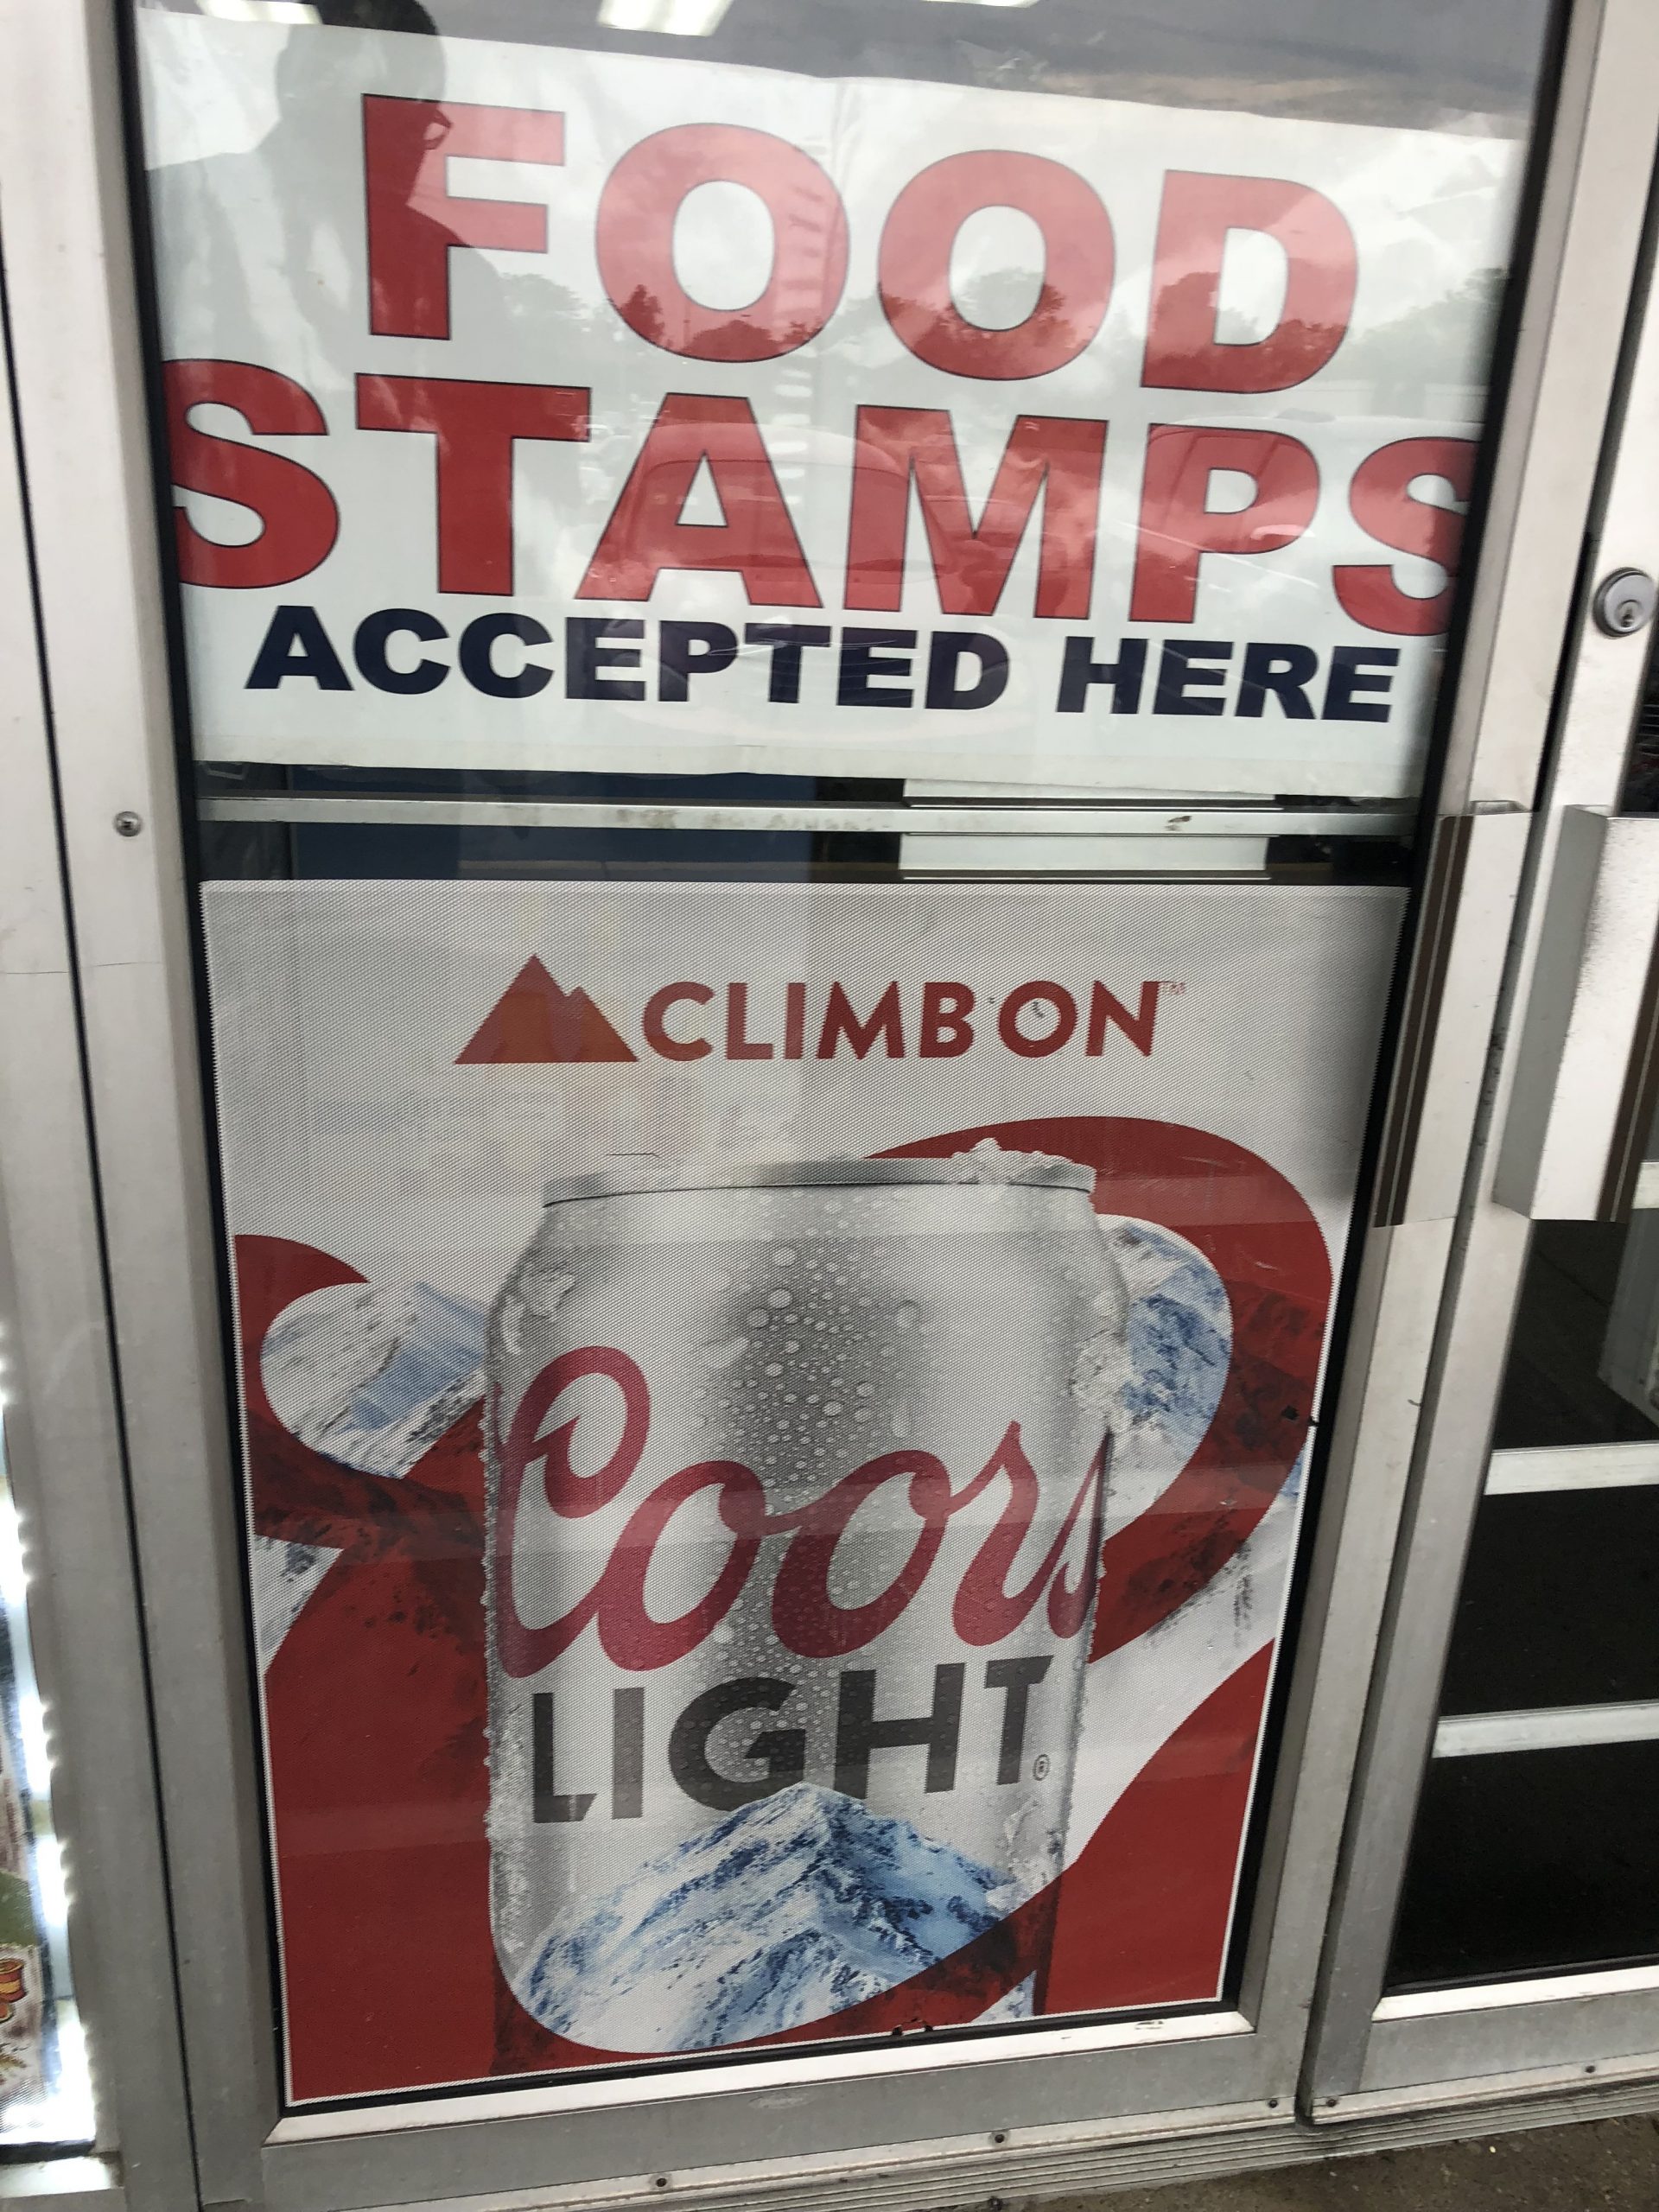 Beer with Food Stamps?